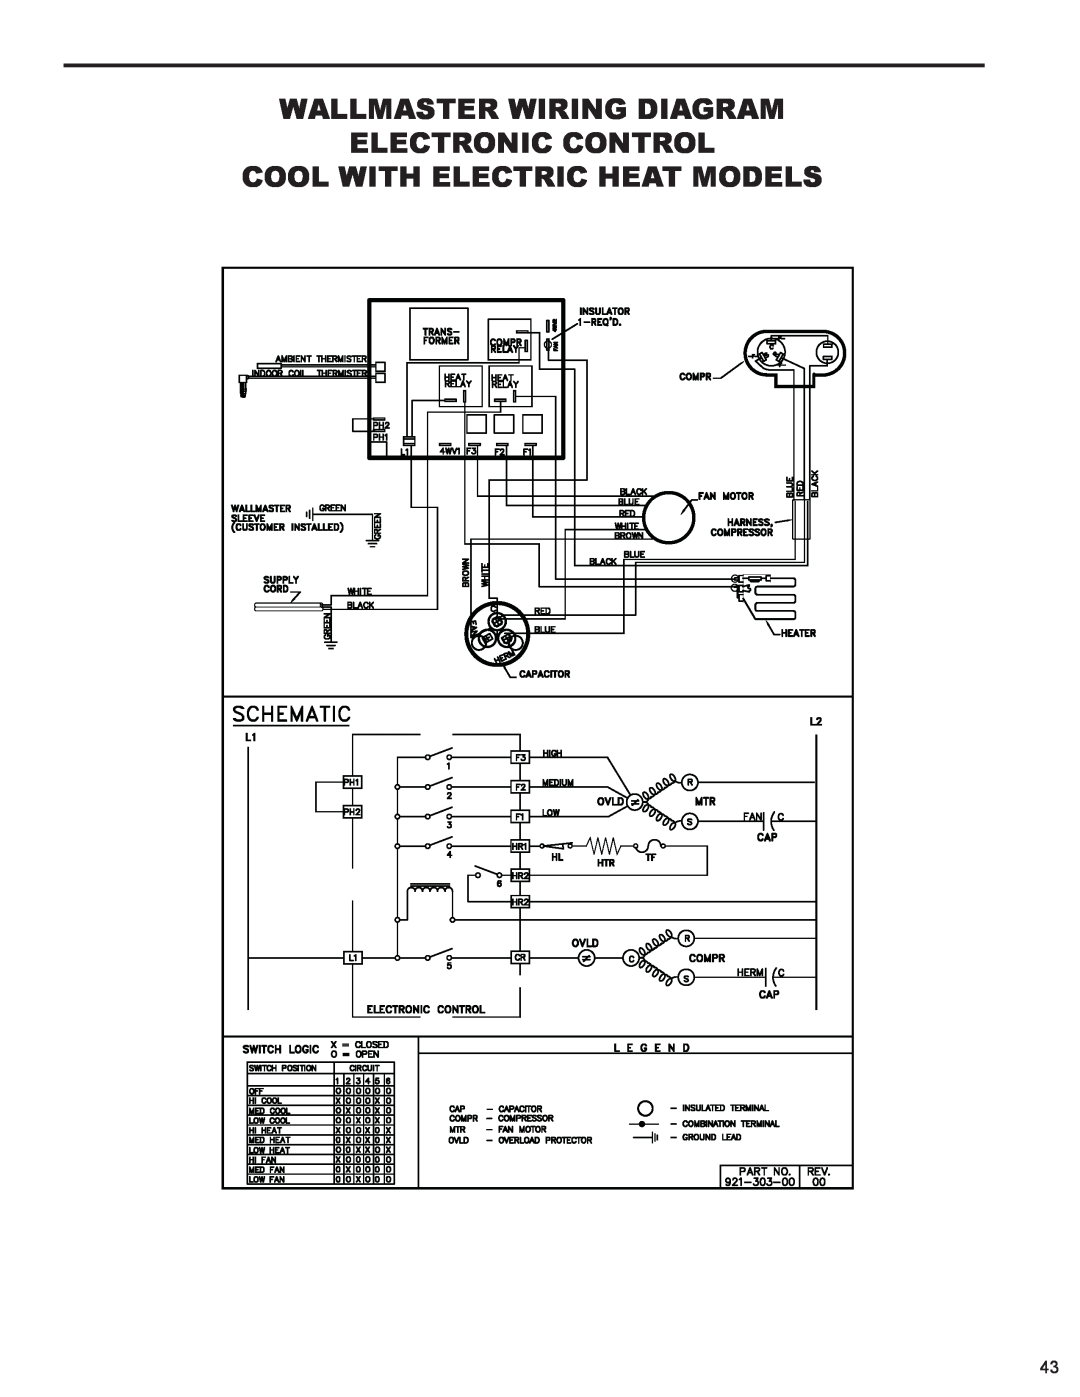 Friedrich WS10B10 service manual Cool With Electric Heat Models, Wallmaster Wiring Diagram Electronic Control 